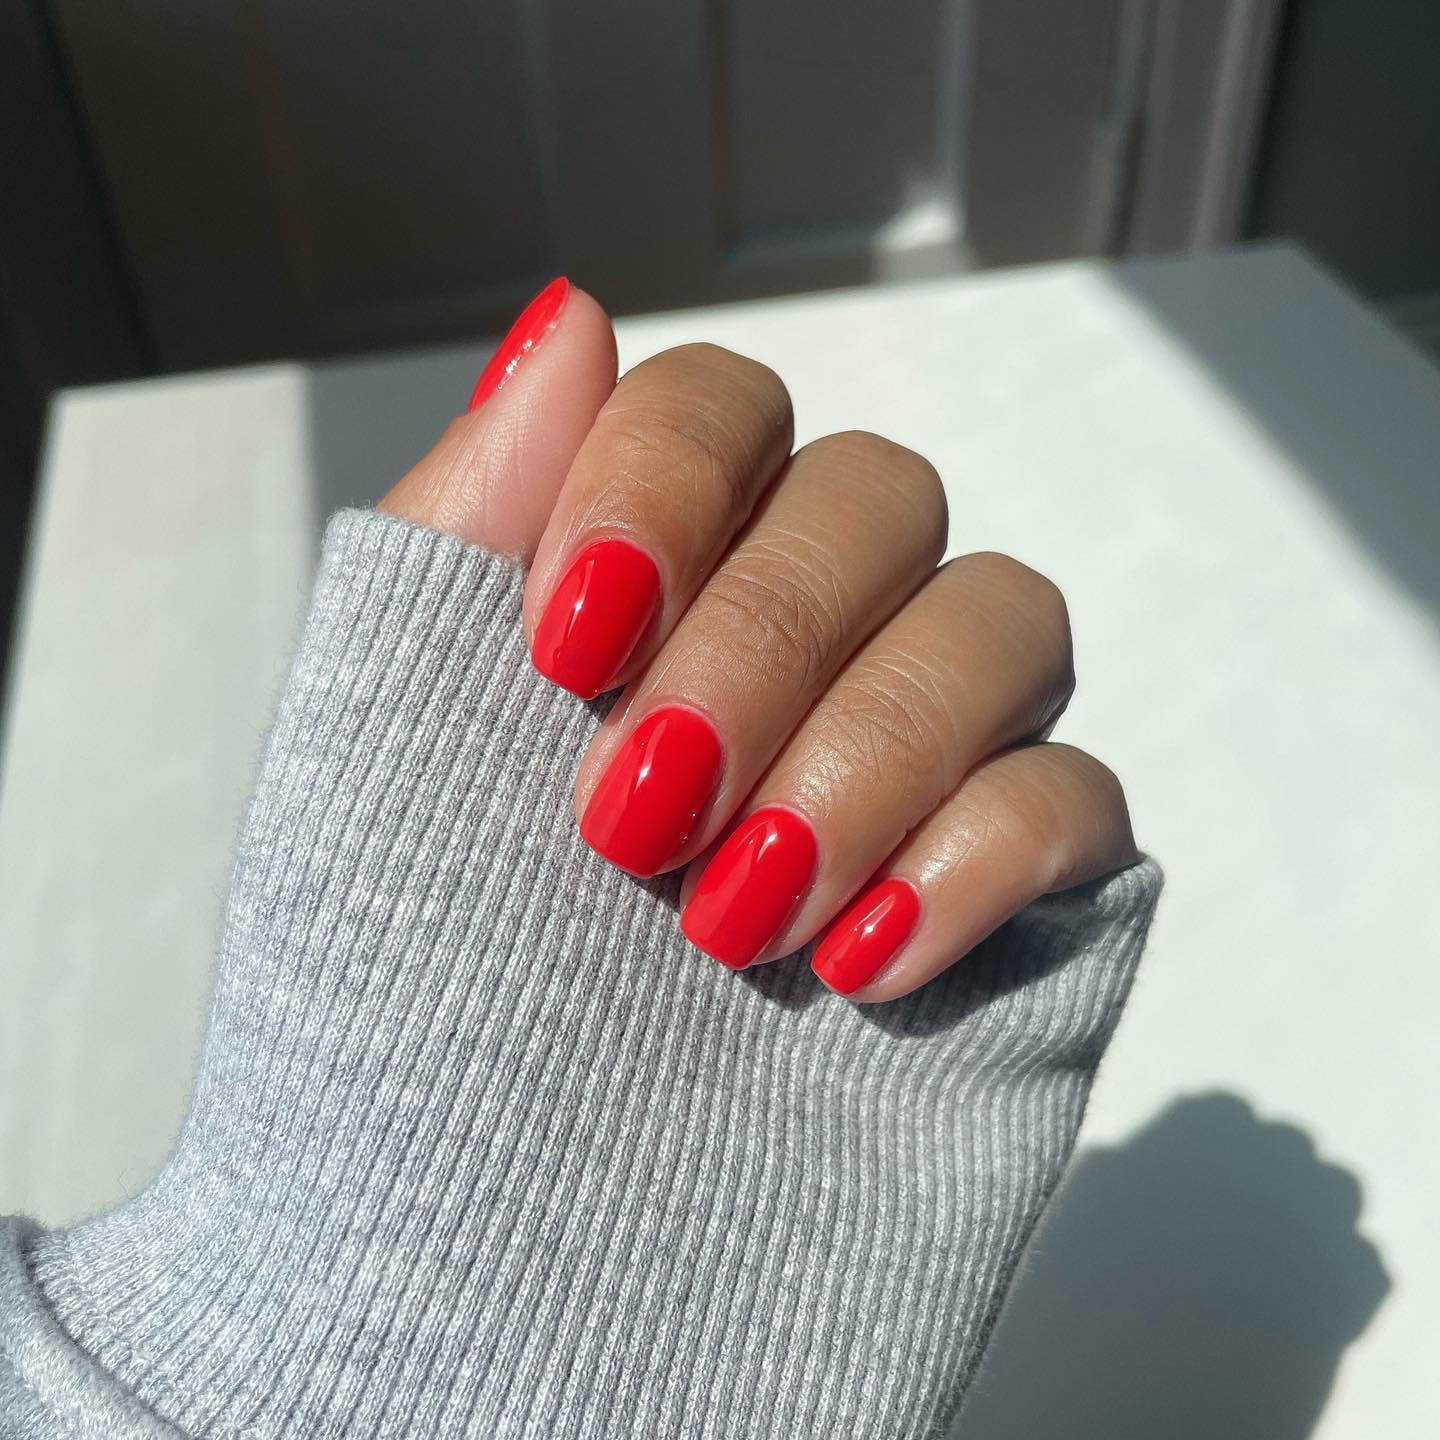 If you like plain nails, this clean red look is for you. It is super easy and it gives you a great look.